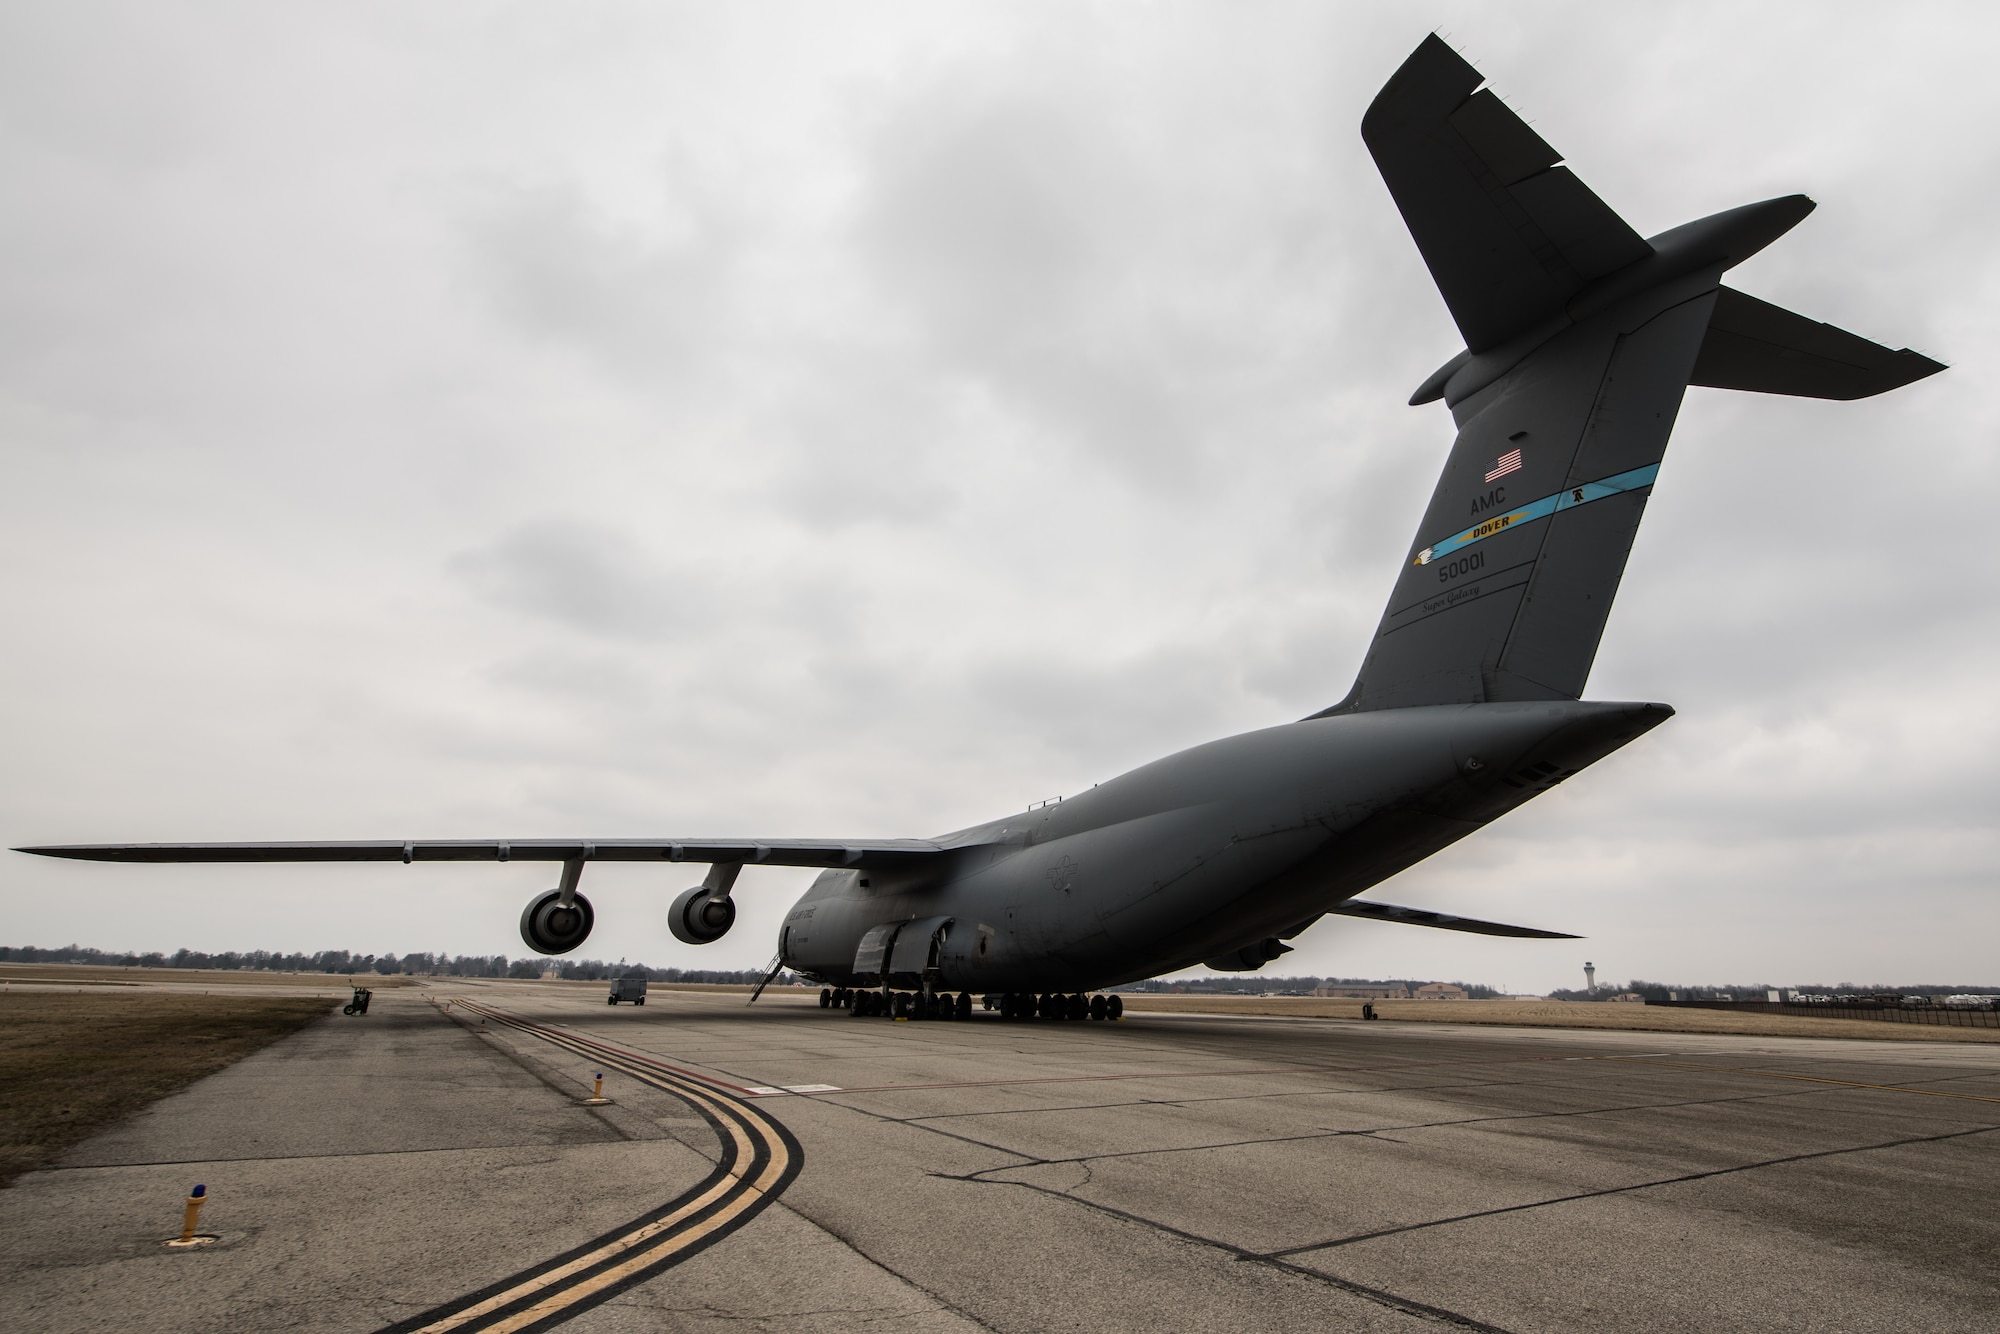 The C-5M Super Galaxy’s crew from the 142nd Airlift Squadron, Aeromedical Evacuation Squadron,  train with the 932nd Airlift Wing AES on patient loading procedures, March 2, 2019, Scott Air Force Base, Illinois. The training prepares AES members to become more efficient in transferring patients on the C-5M Super Galaxy. (U.S. Air Force photo by Senior Airman Brooke Deiters)